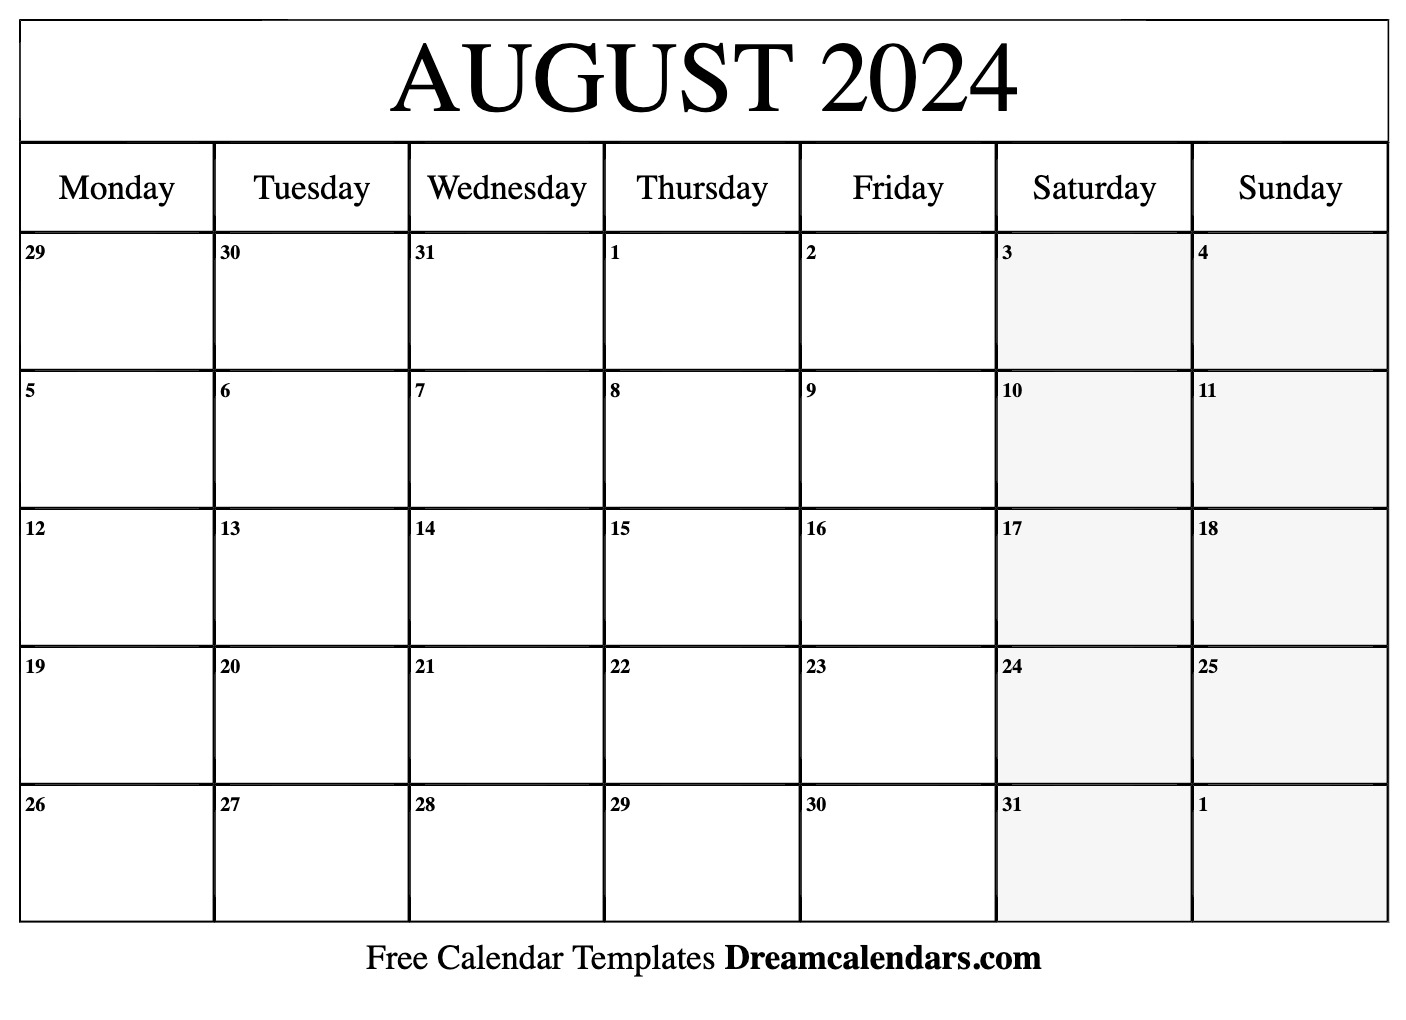 August 2024 Calendar | Free Blank Printable With Holidays for Blank August 2024 Calendar Printable